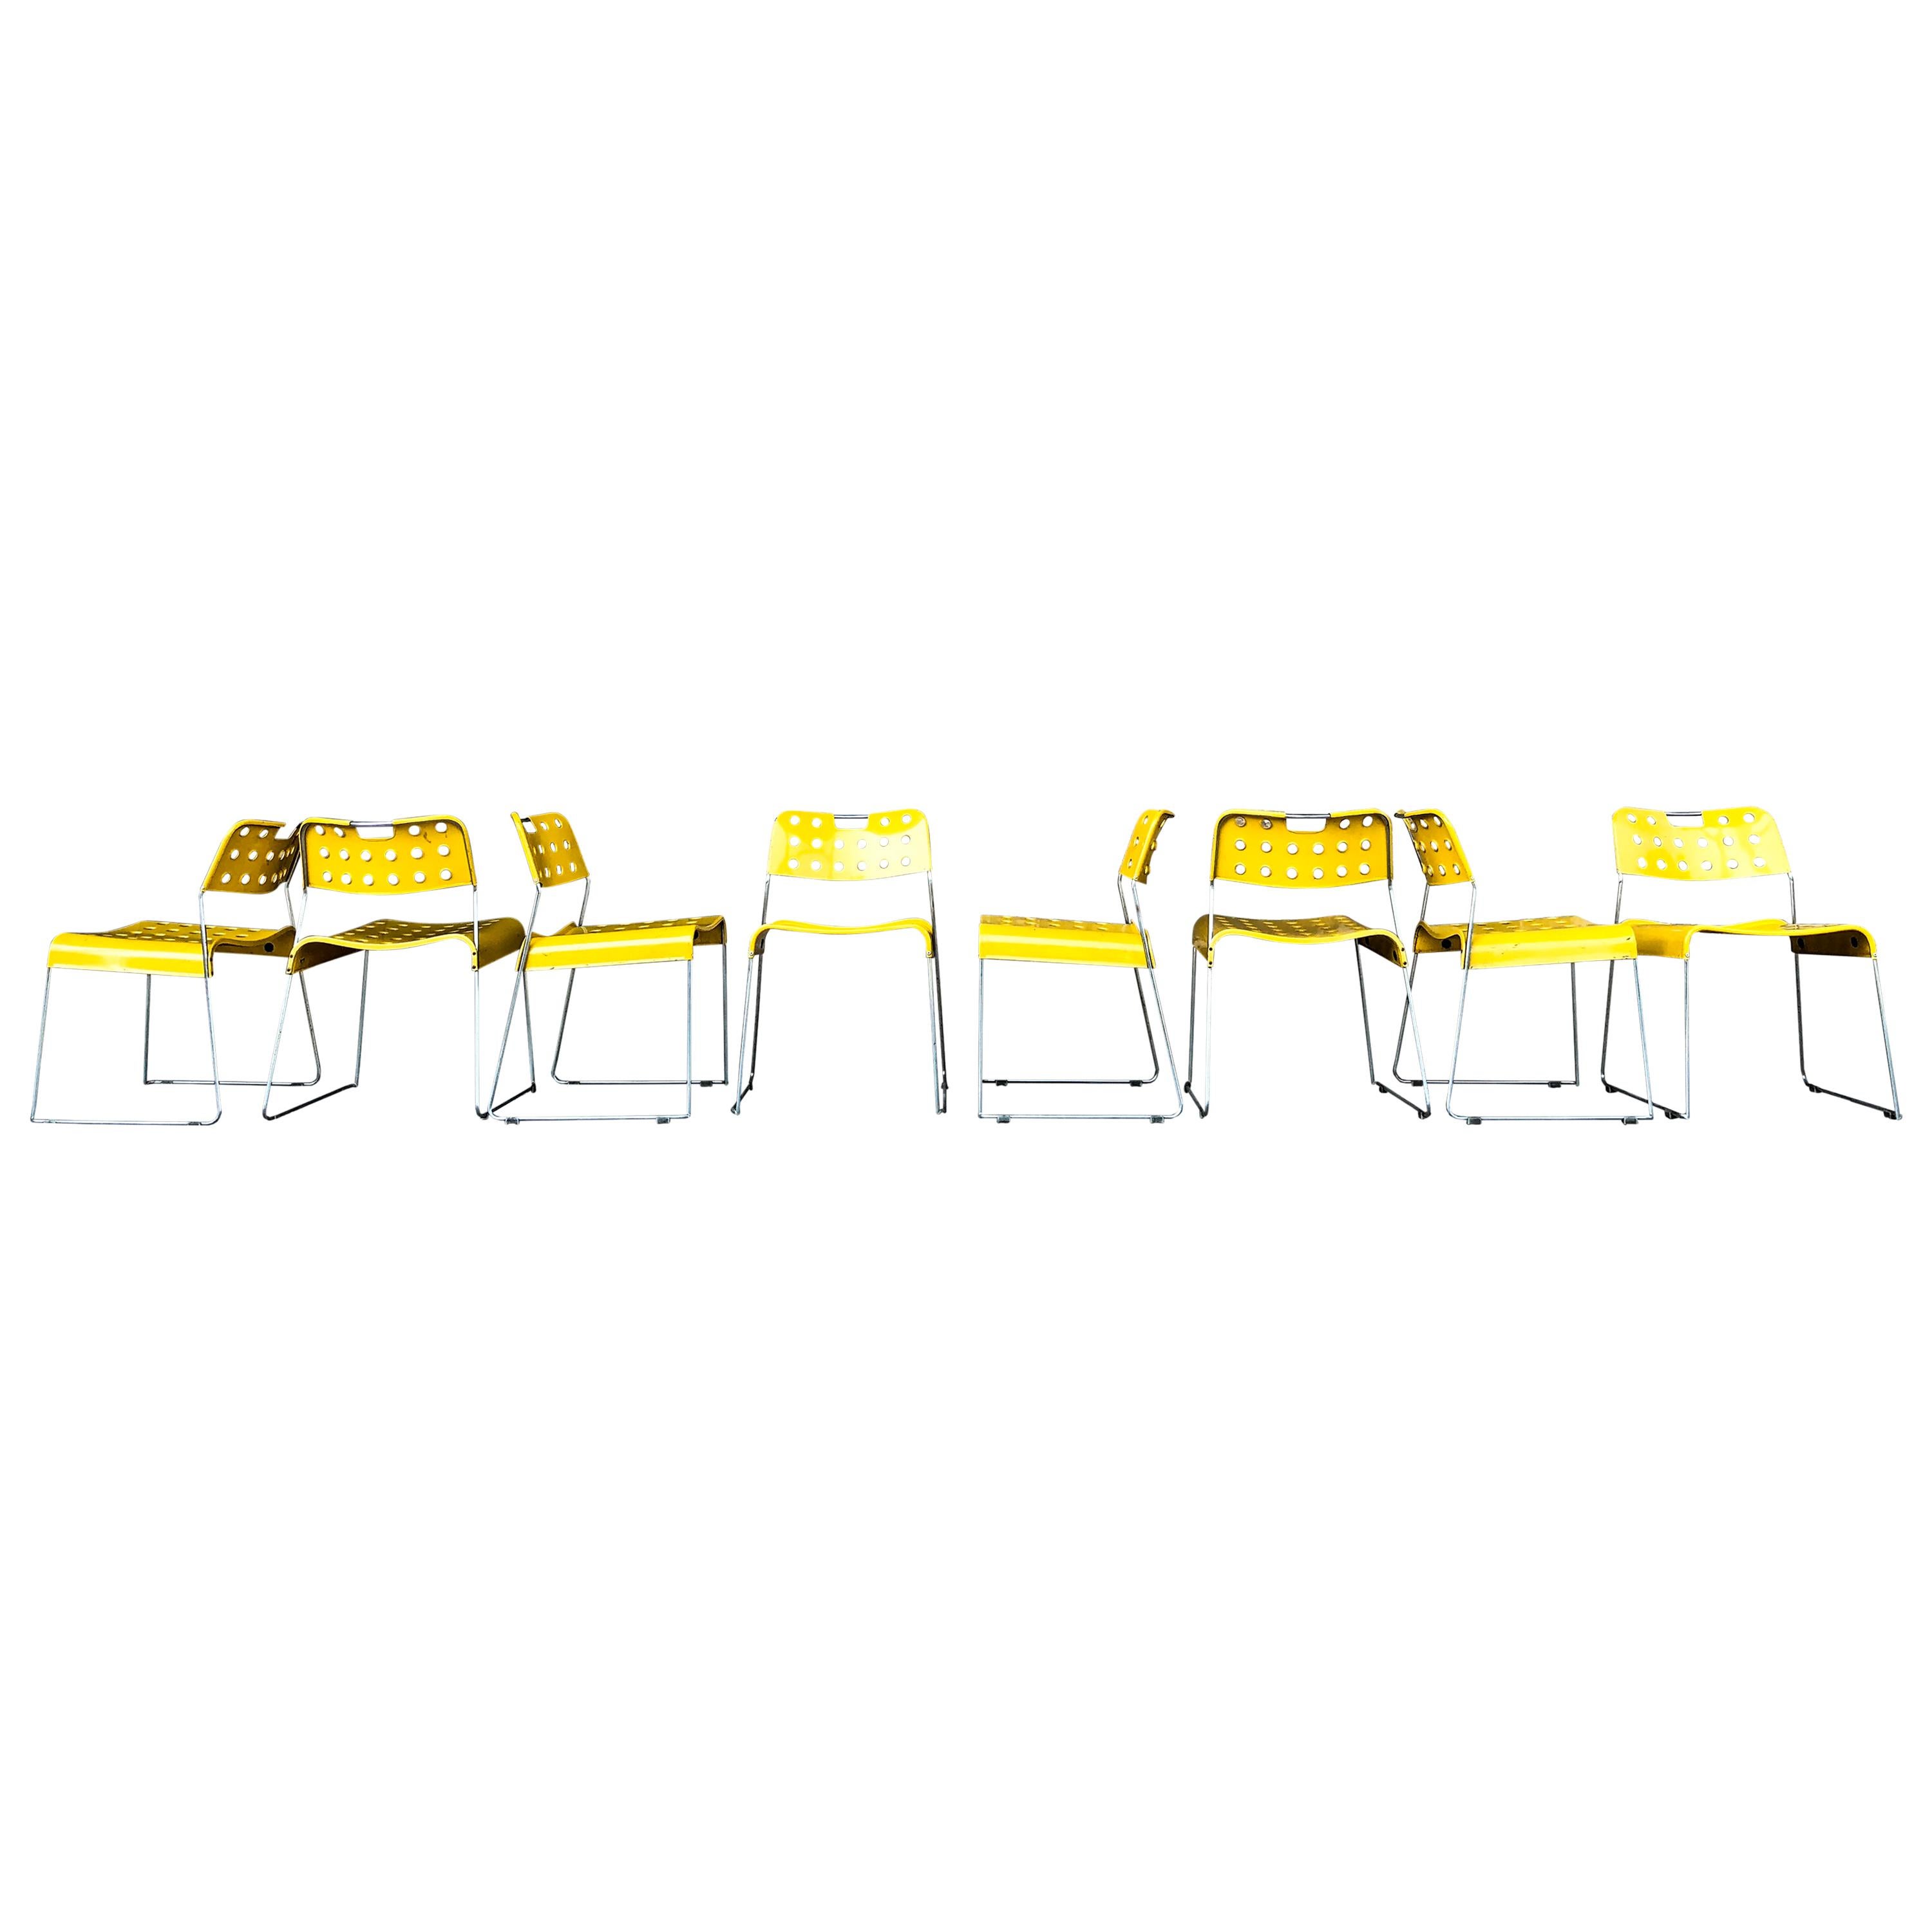 Late 20th Century Rodney Kinsman Space Age Yellow Omstak Chair for Bieffeplast, 1971, Set of 6 For Sale